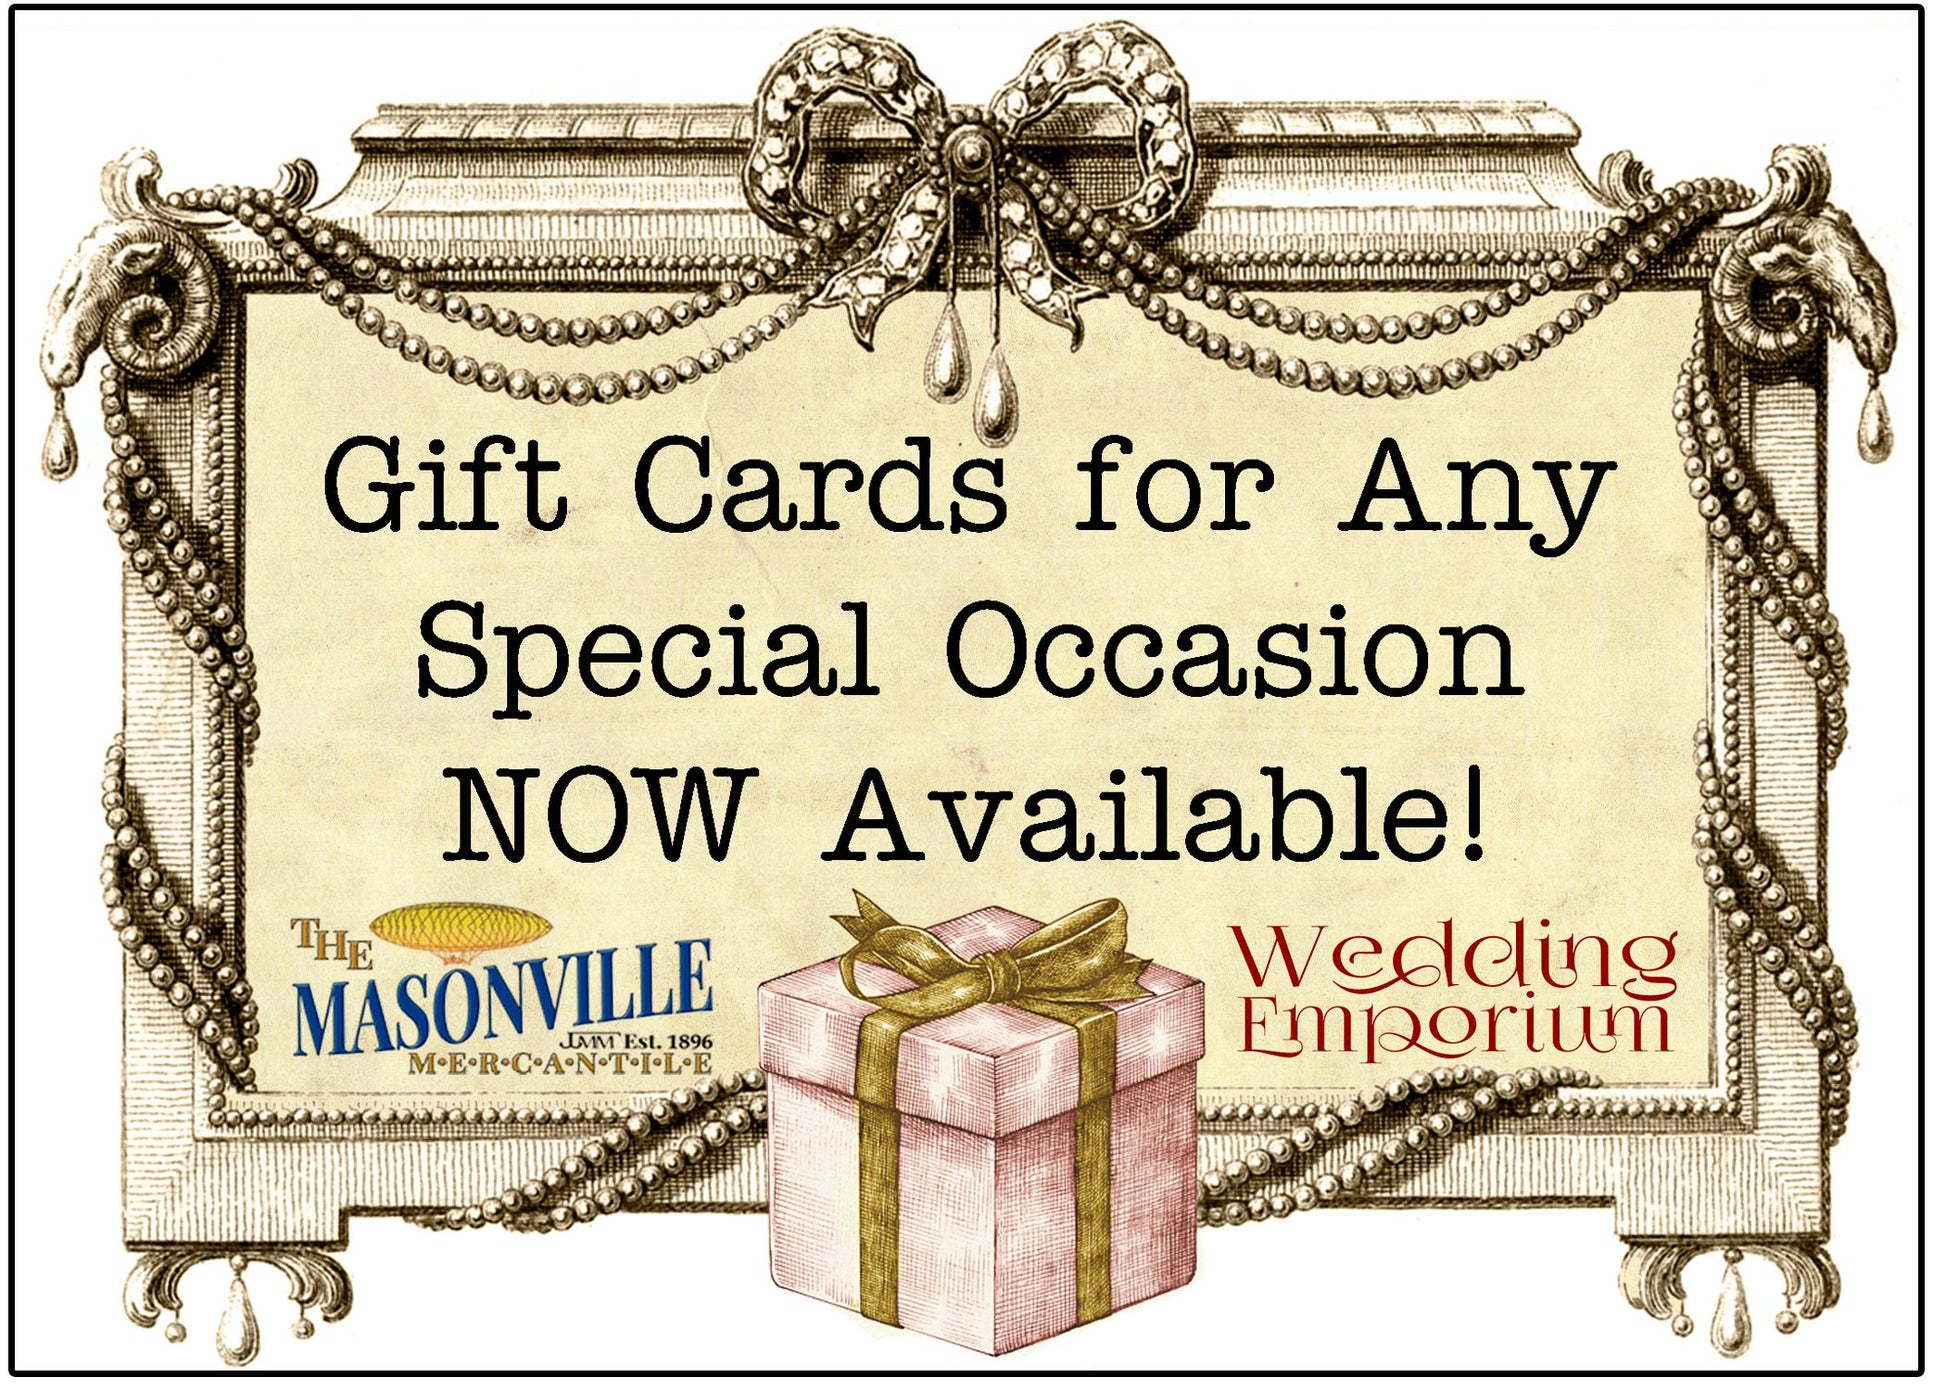 Gift cards avaiable at Masonville Mercantile